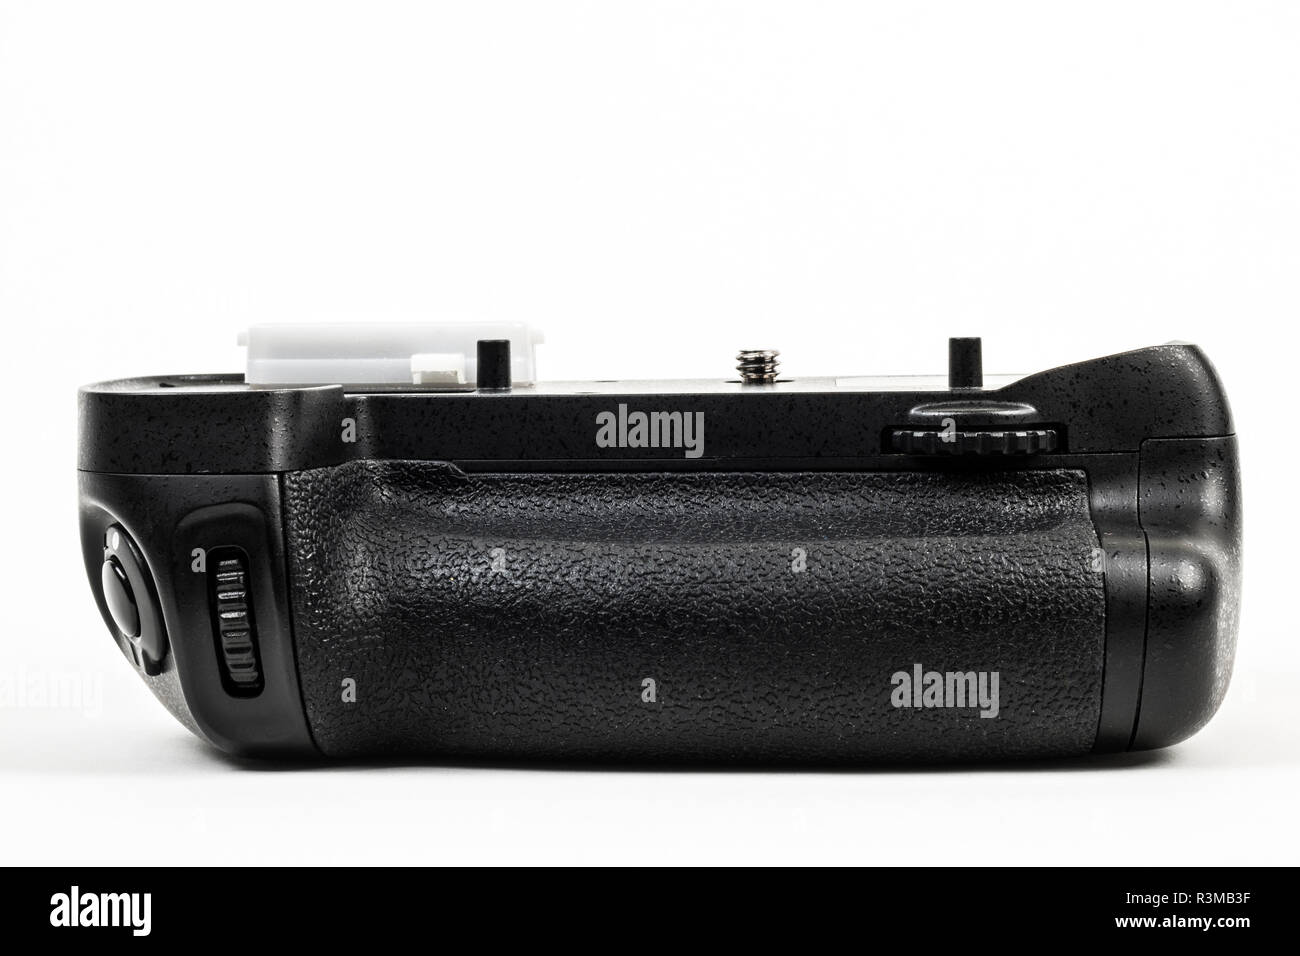 DSLR camera battery grip color black isolated in white. Front view. Stock Photo